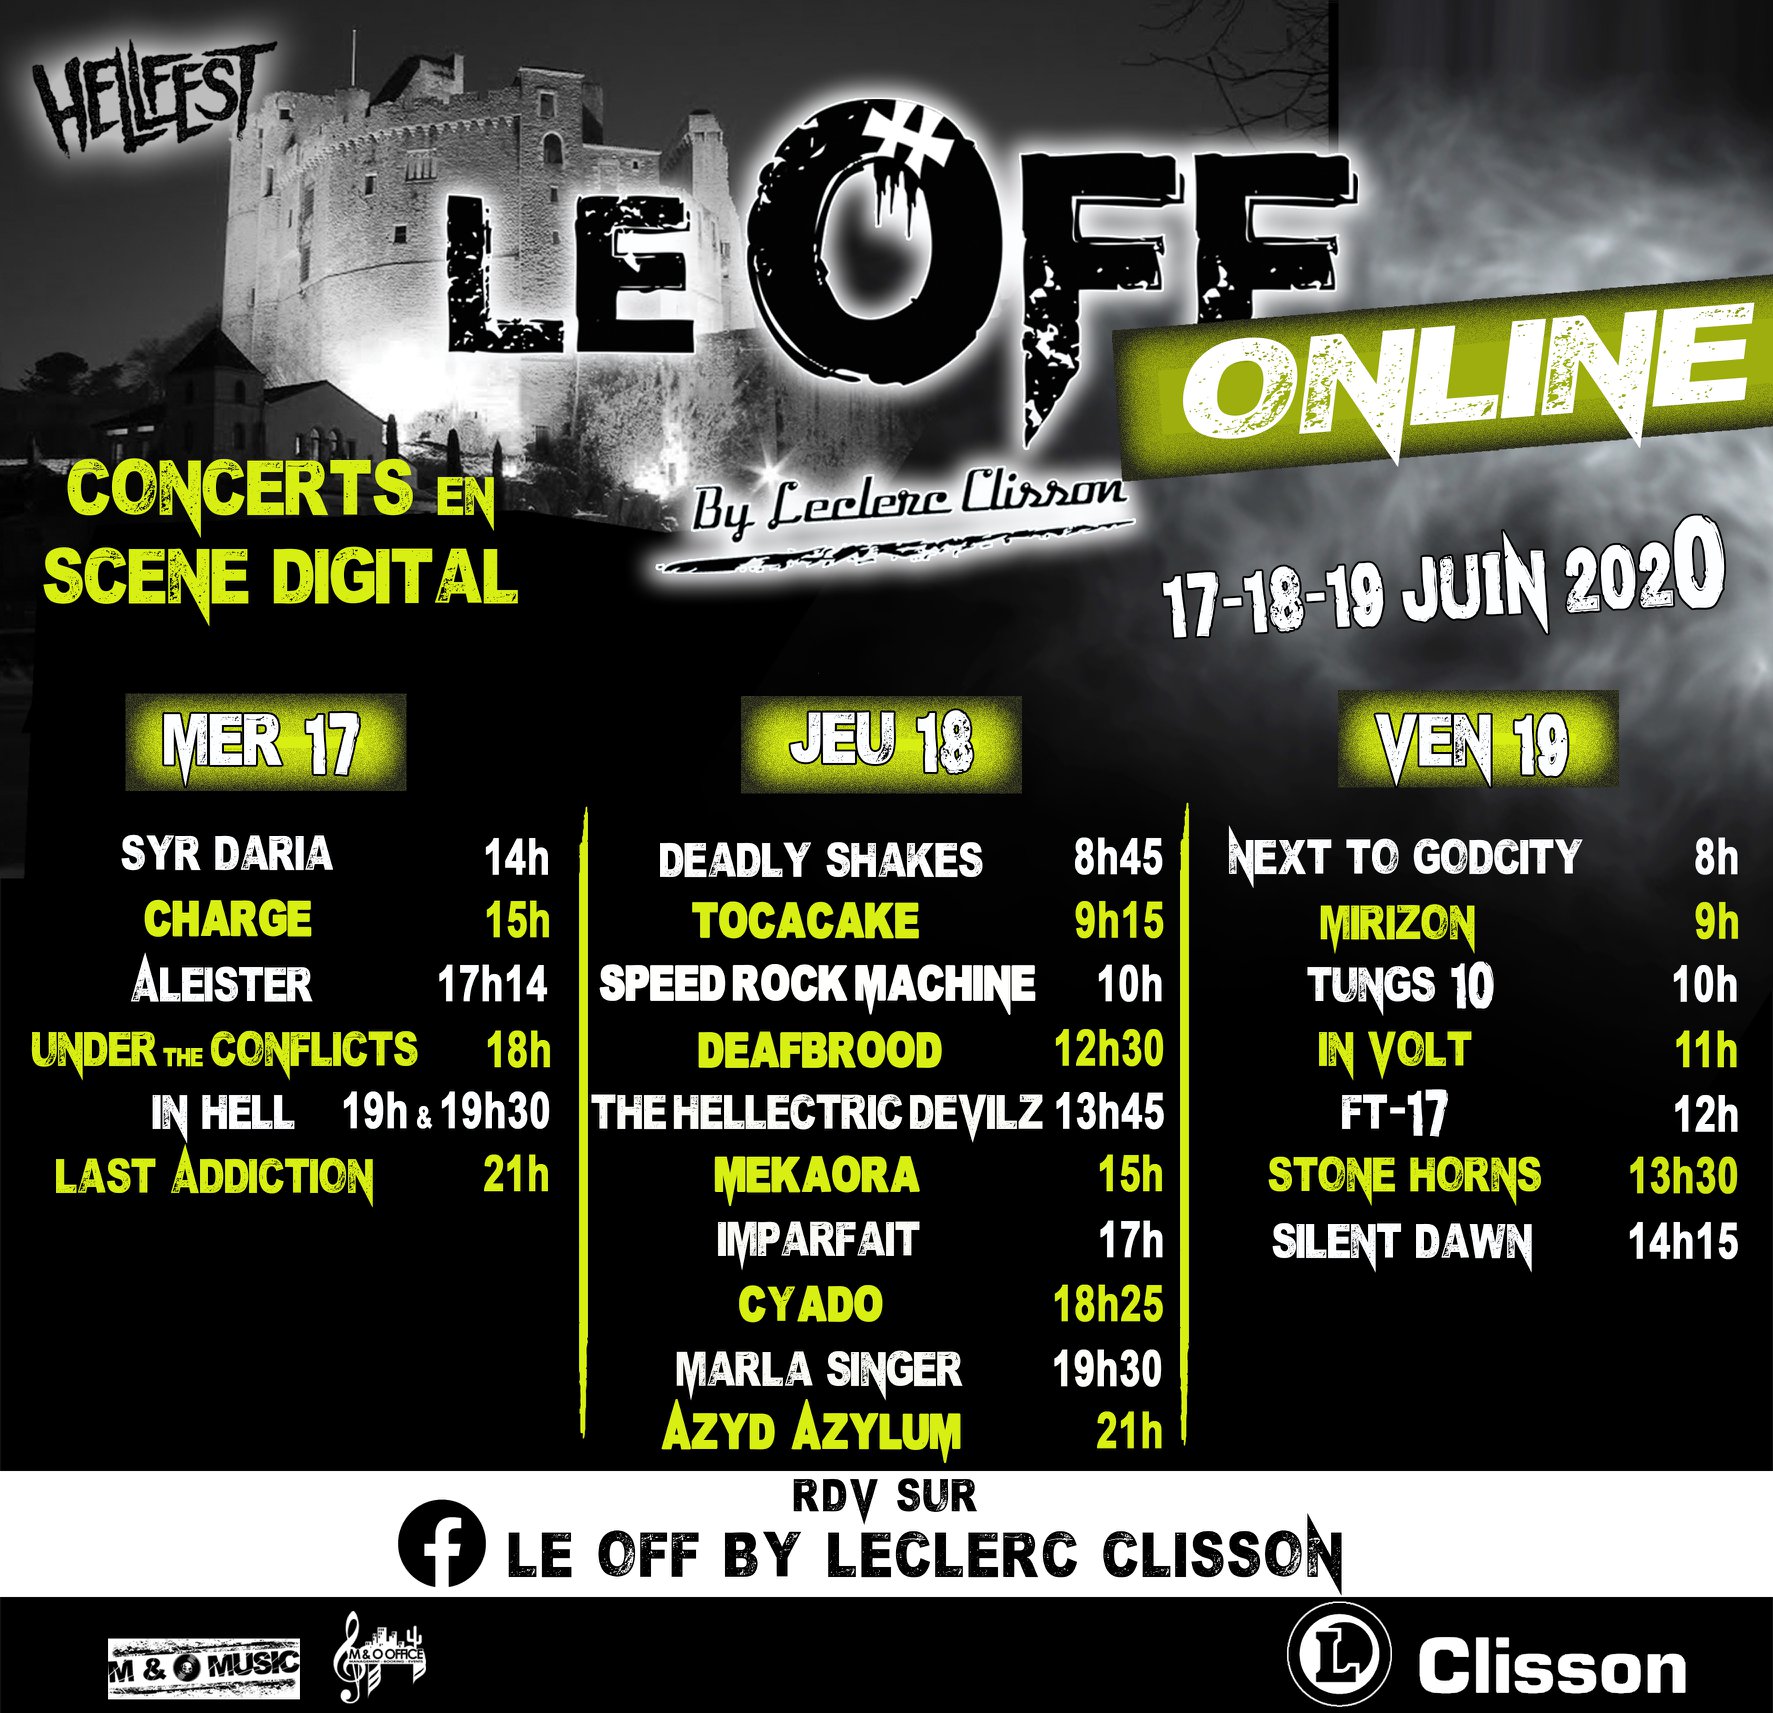 Hellfest – Le Off by Leclerc Clisson on line